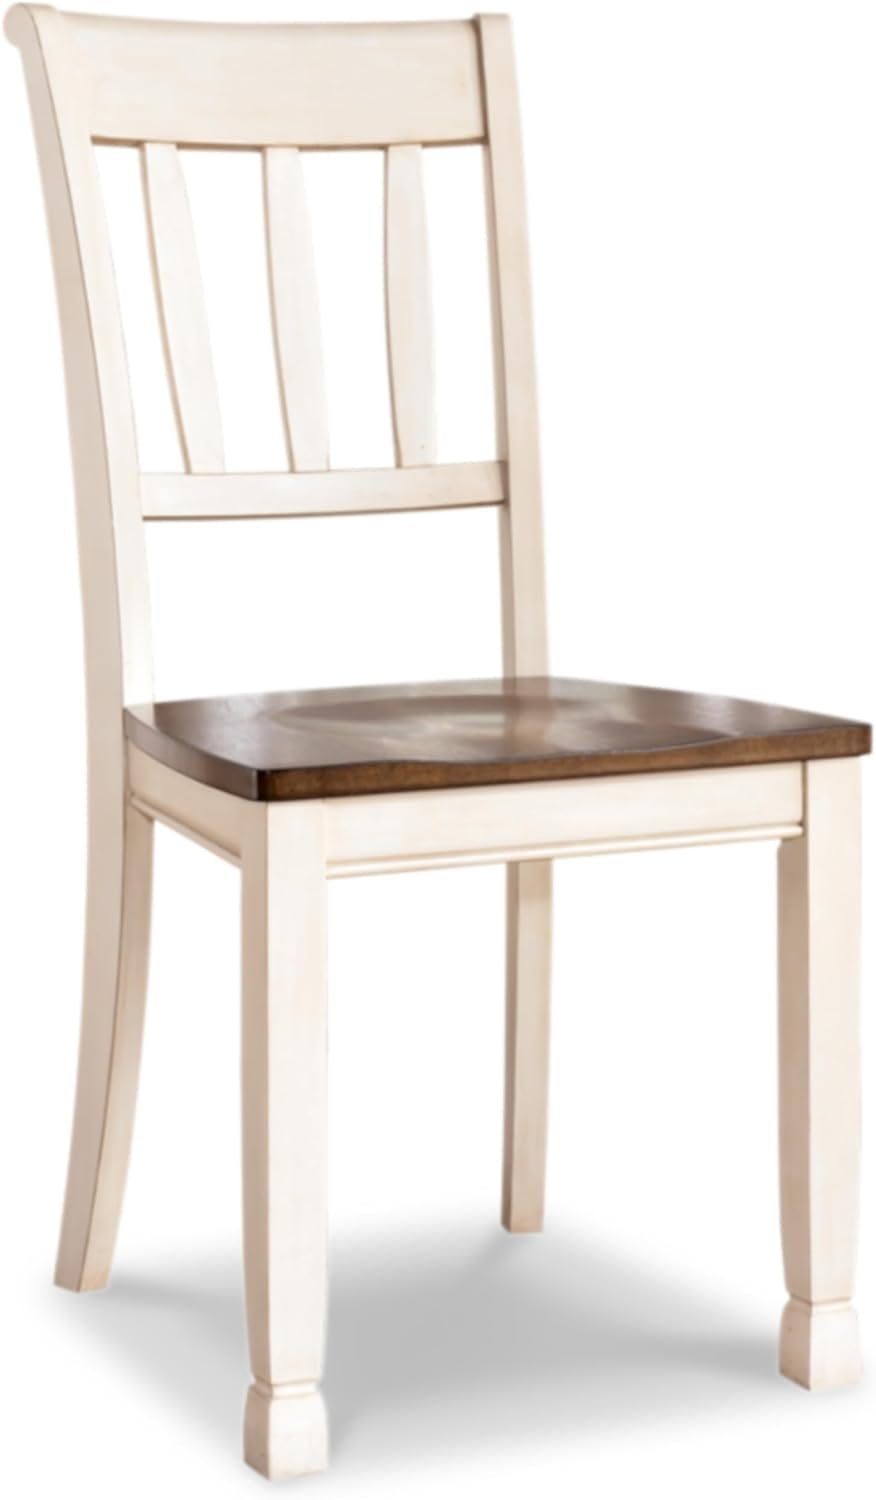 Cottage Charm Two-Tone Wooden Side Chair with Slat Back Design